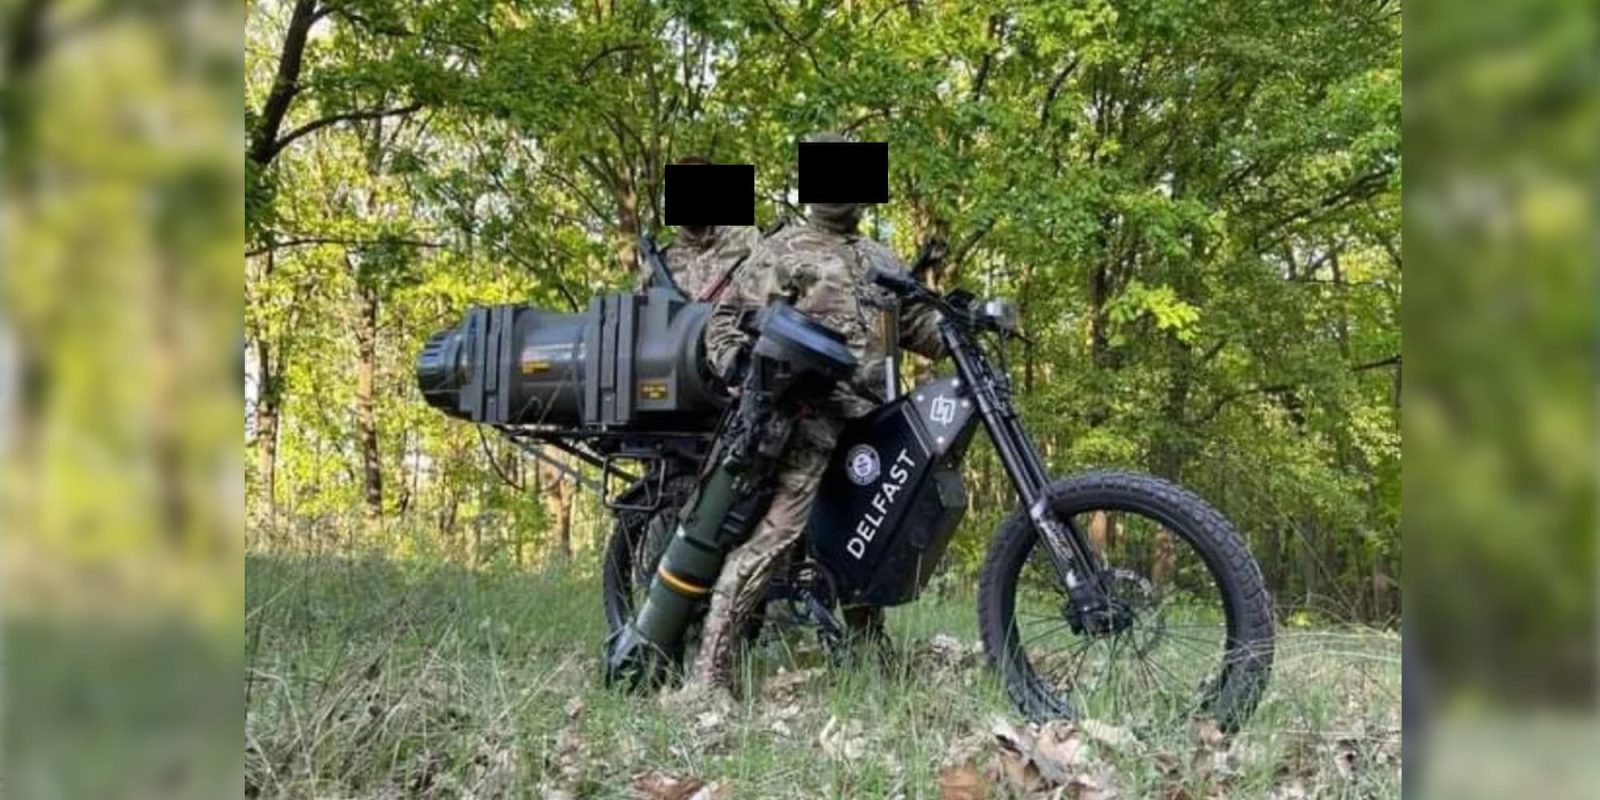 Ukraine is now using these 200 mile range electric bikes with NLAW rockets to take out Russian tanks